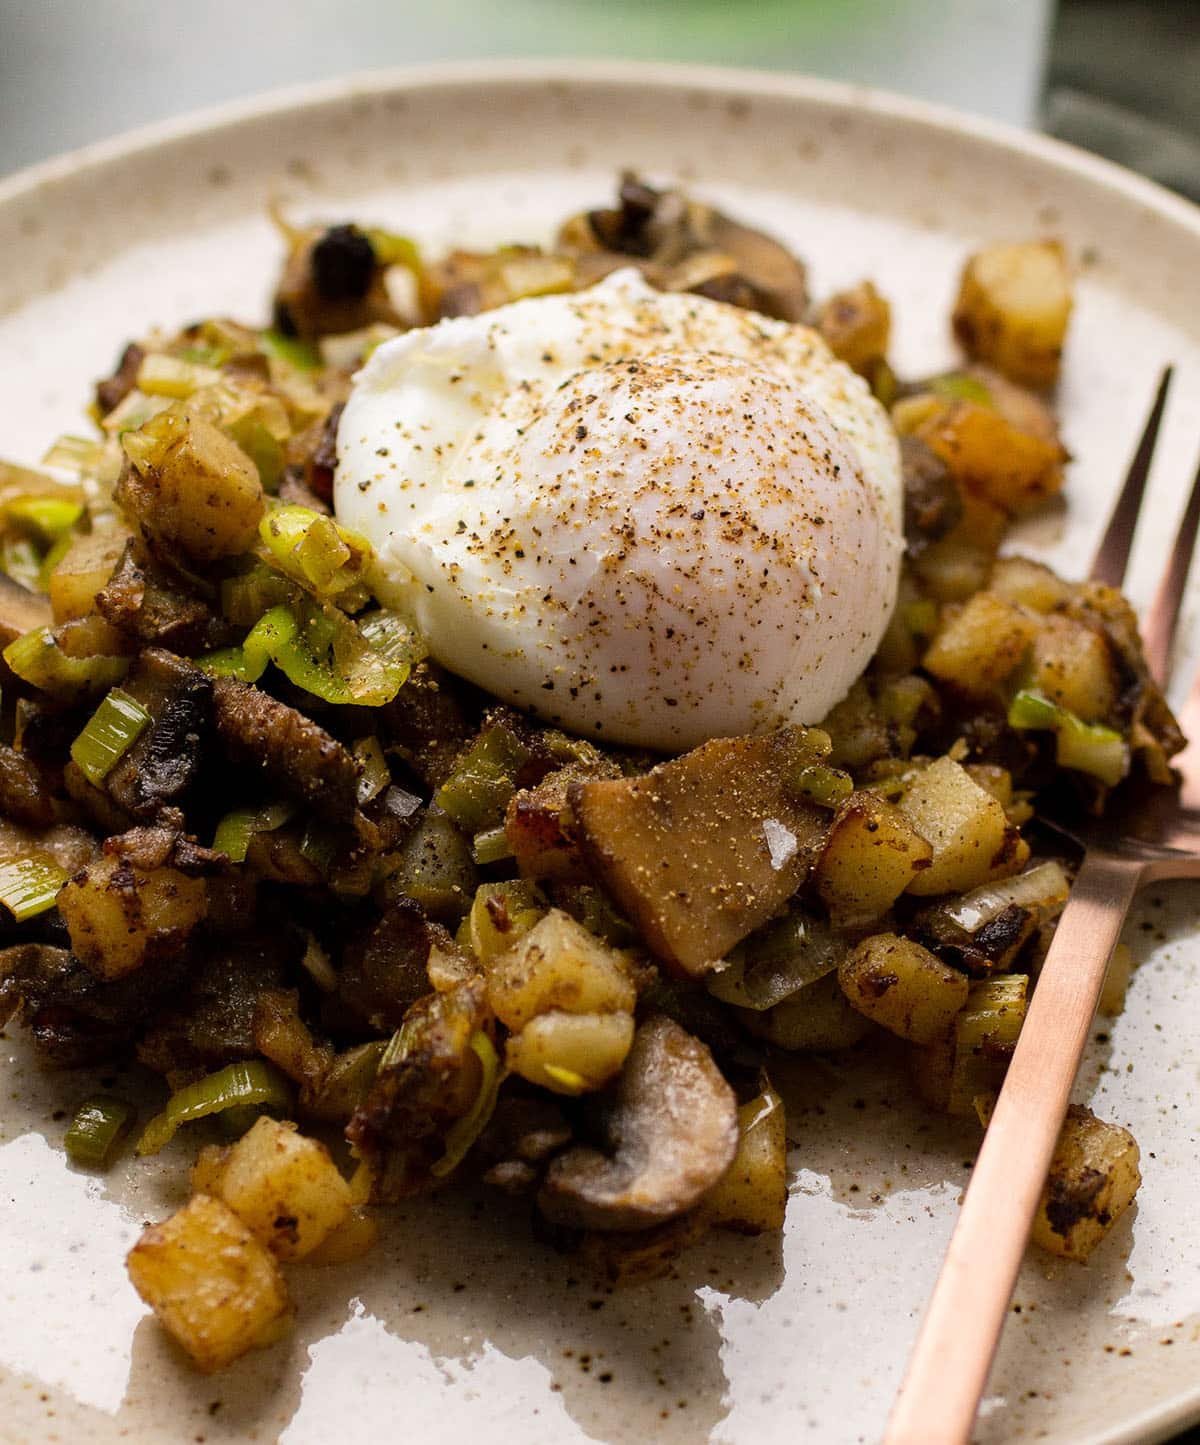 Poached egg on top of mushroom hash.